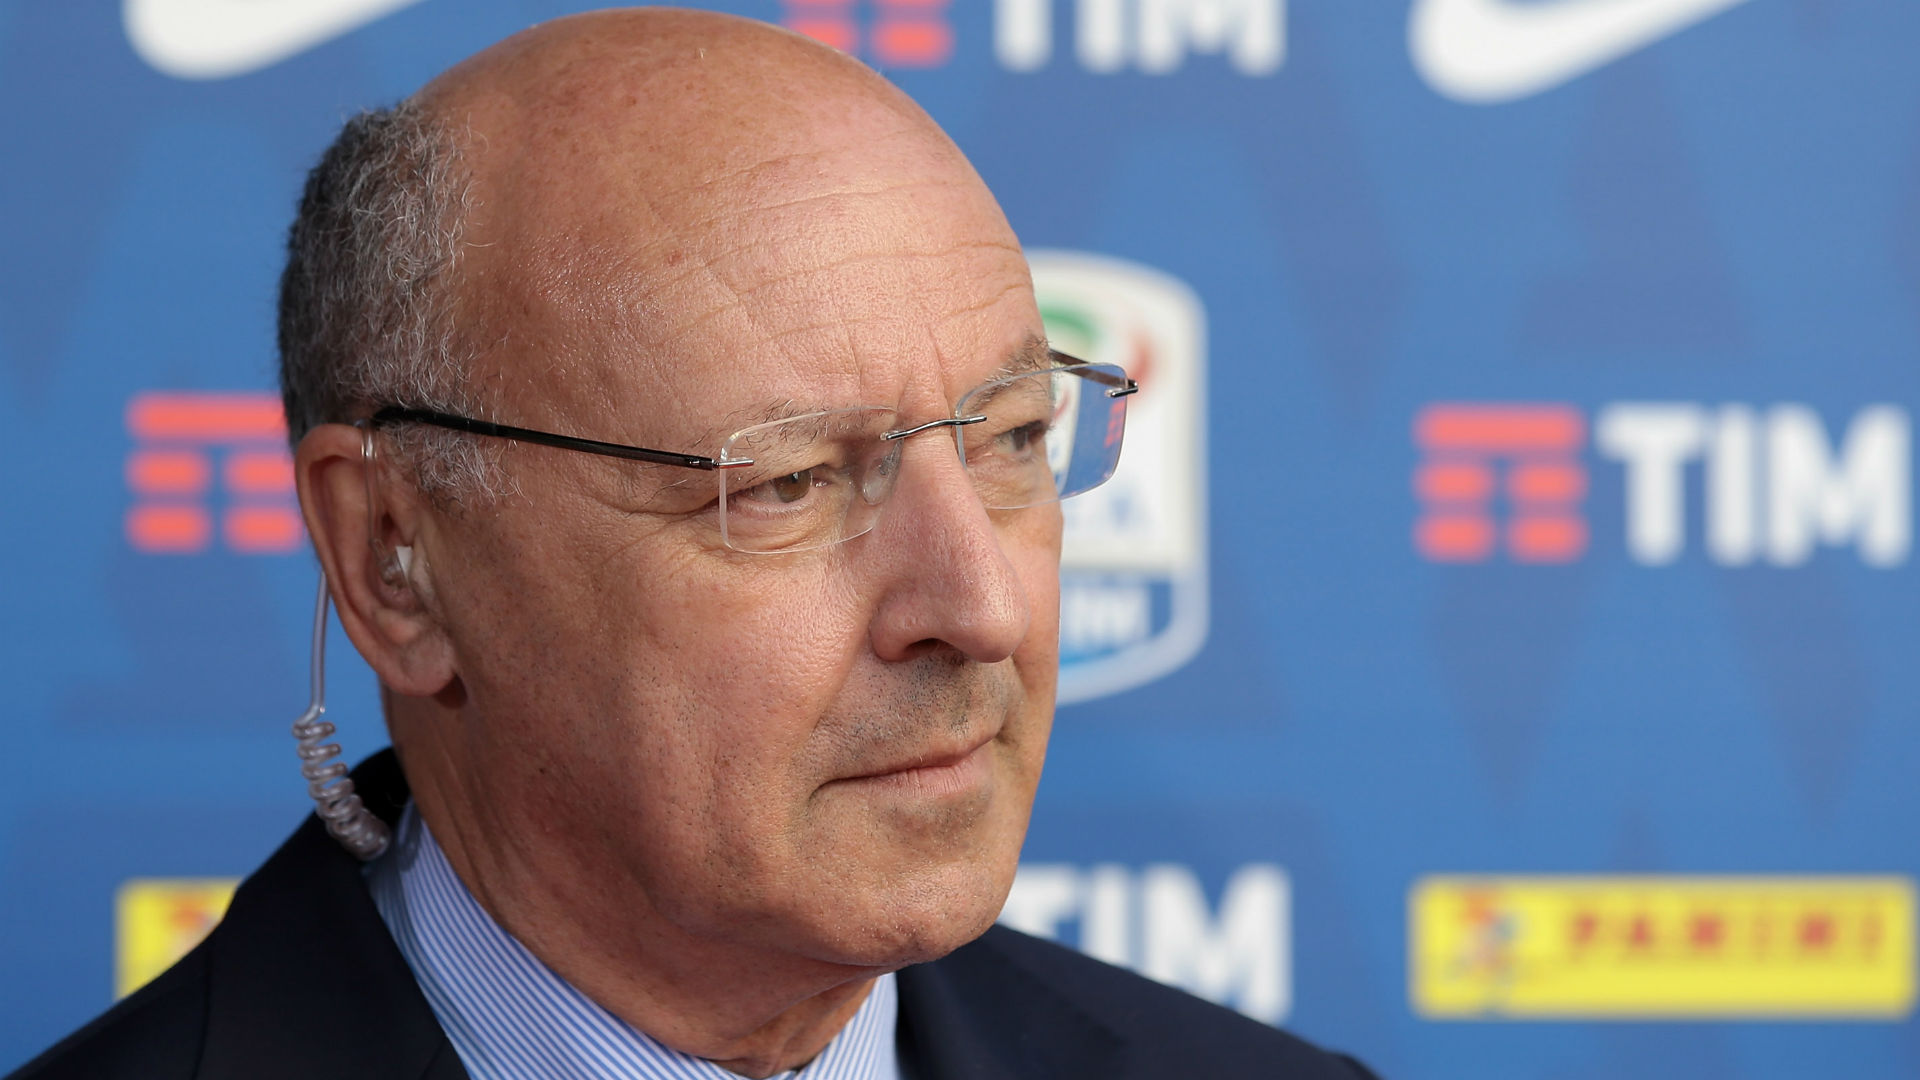 Inter have a new CEO, as Giuseppe Marotta - formerly a Juventus chief - had his new position confirmed on Thursday.